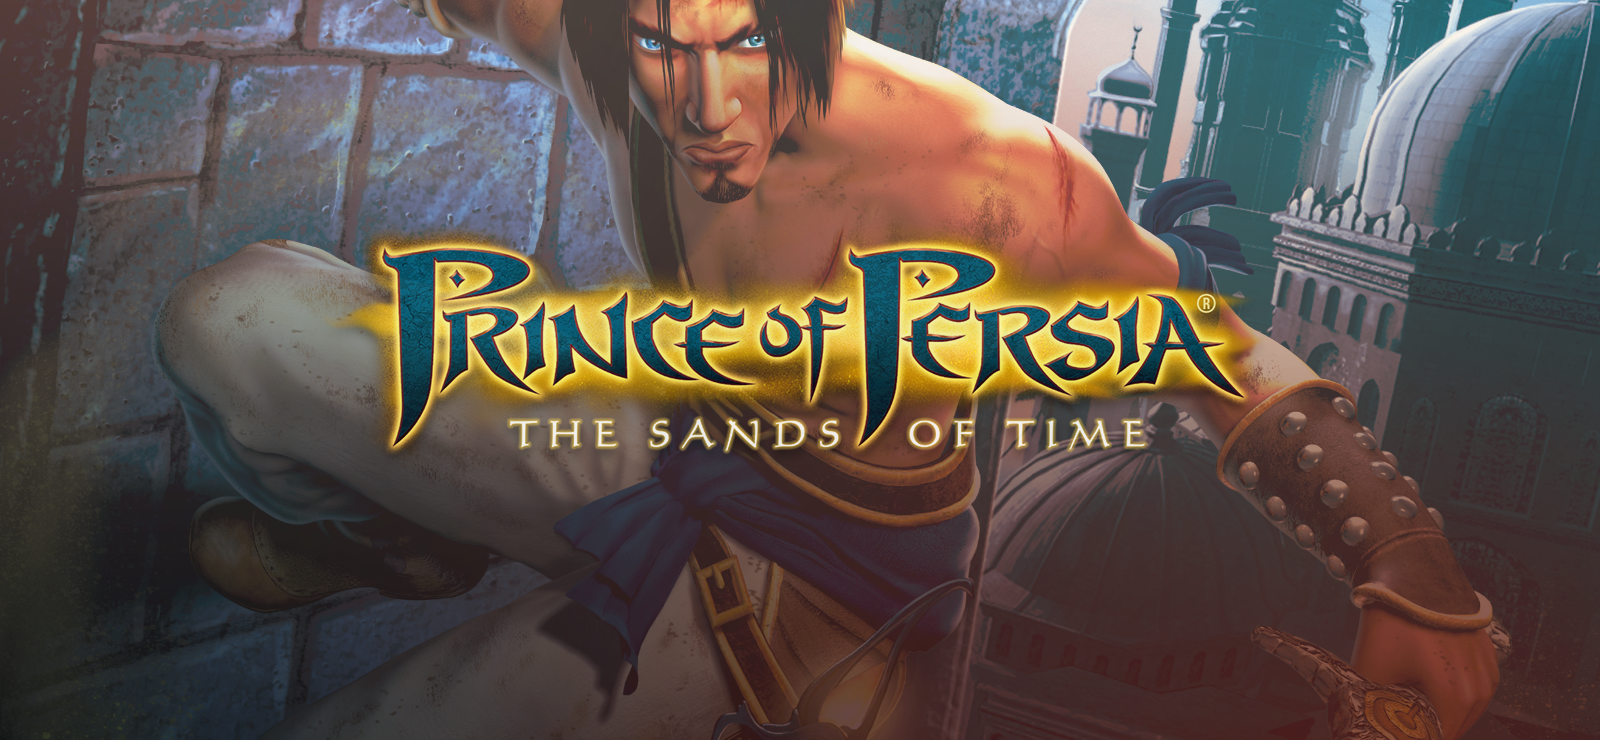 BESTSELLER - Prince Of Persia®: The Sands Of Time